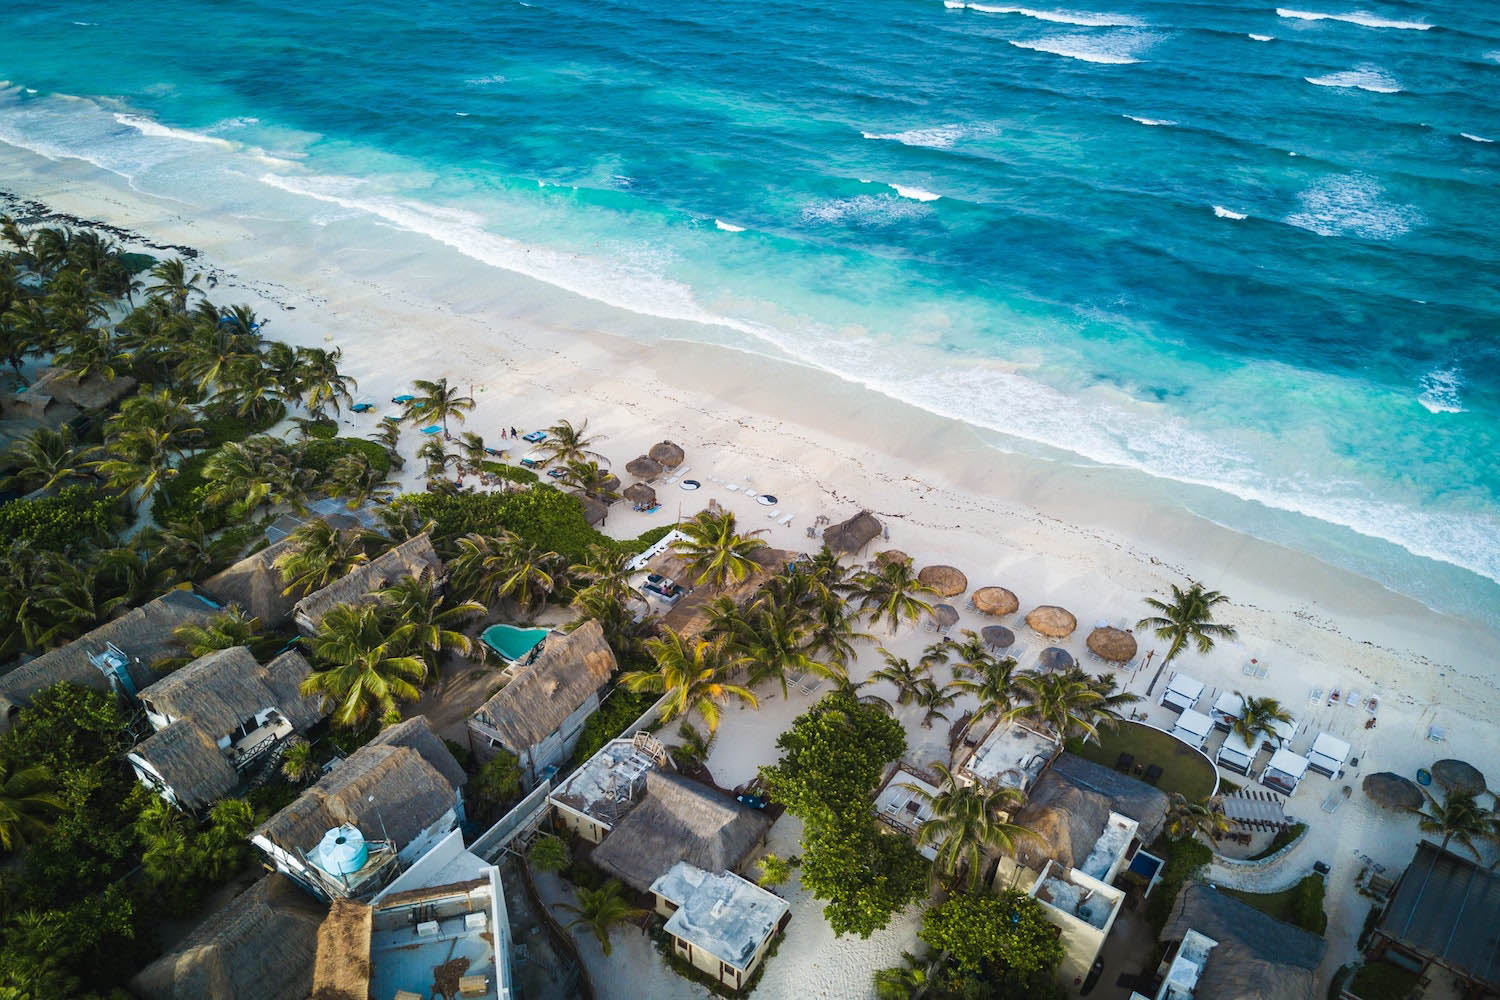 Drone image from above the beach in Mexico with palm trees and waves